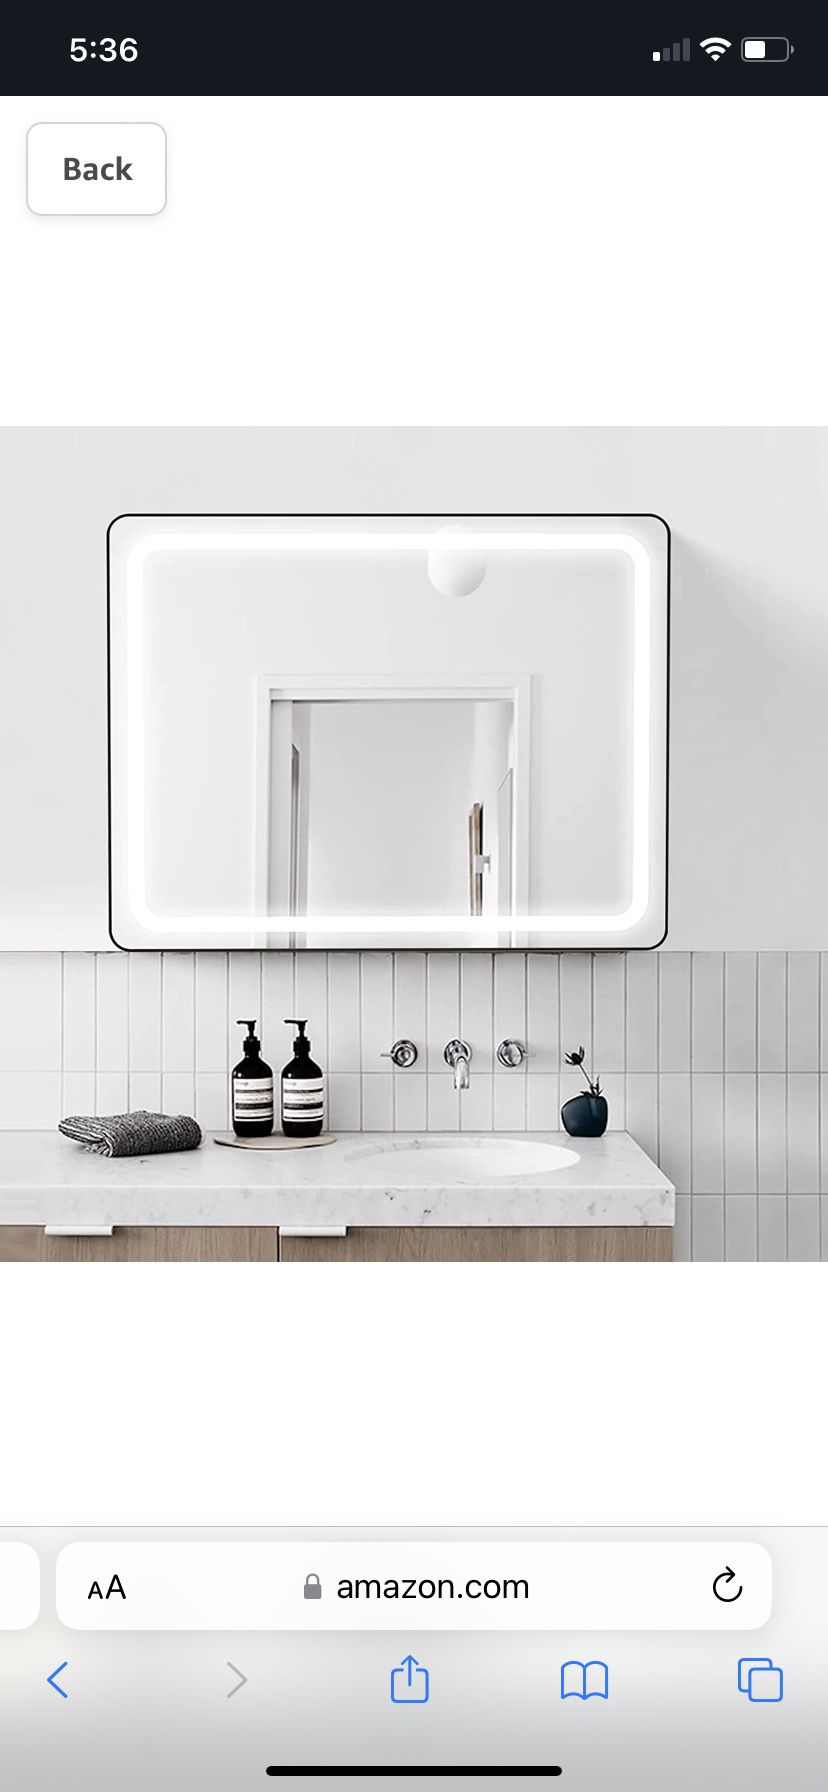 EMBATHER Bathroom Vanity Mirror with LED Lights 40x24, Adjustable 3 Colors LED Mirror for Bathroom, Wall Mounted Anti-Fog (Horizontal or Vertical) Bla